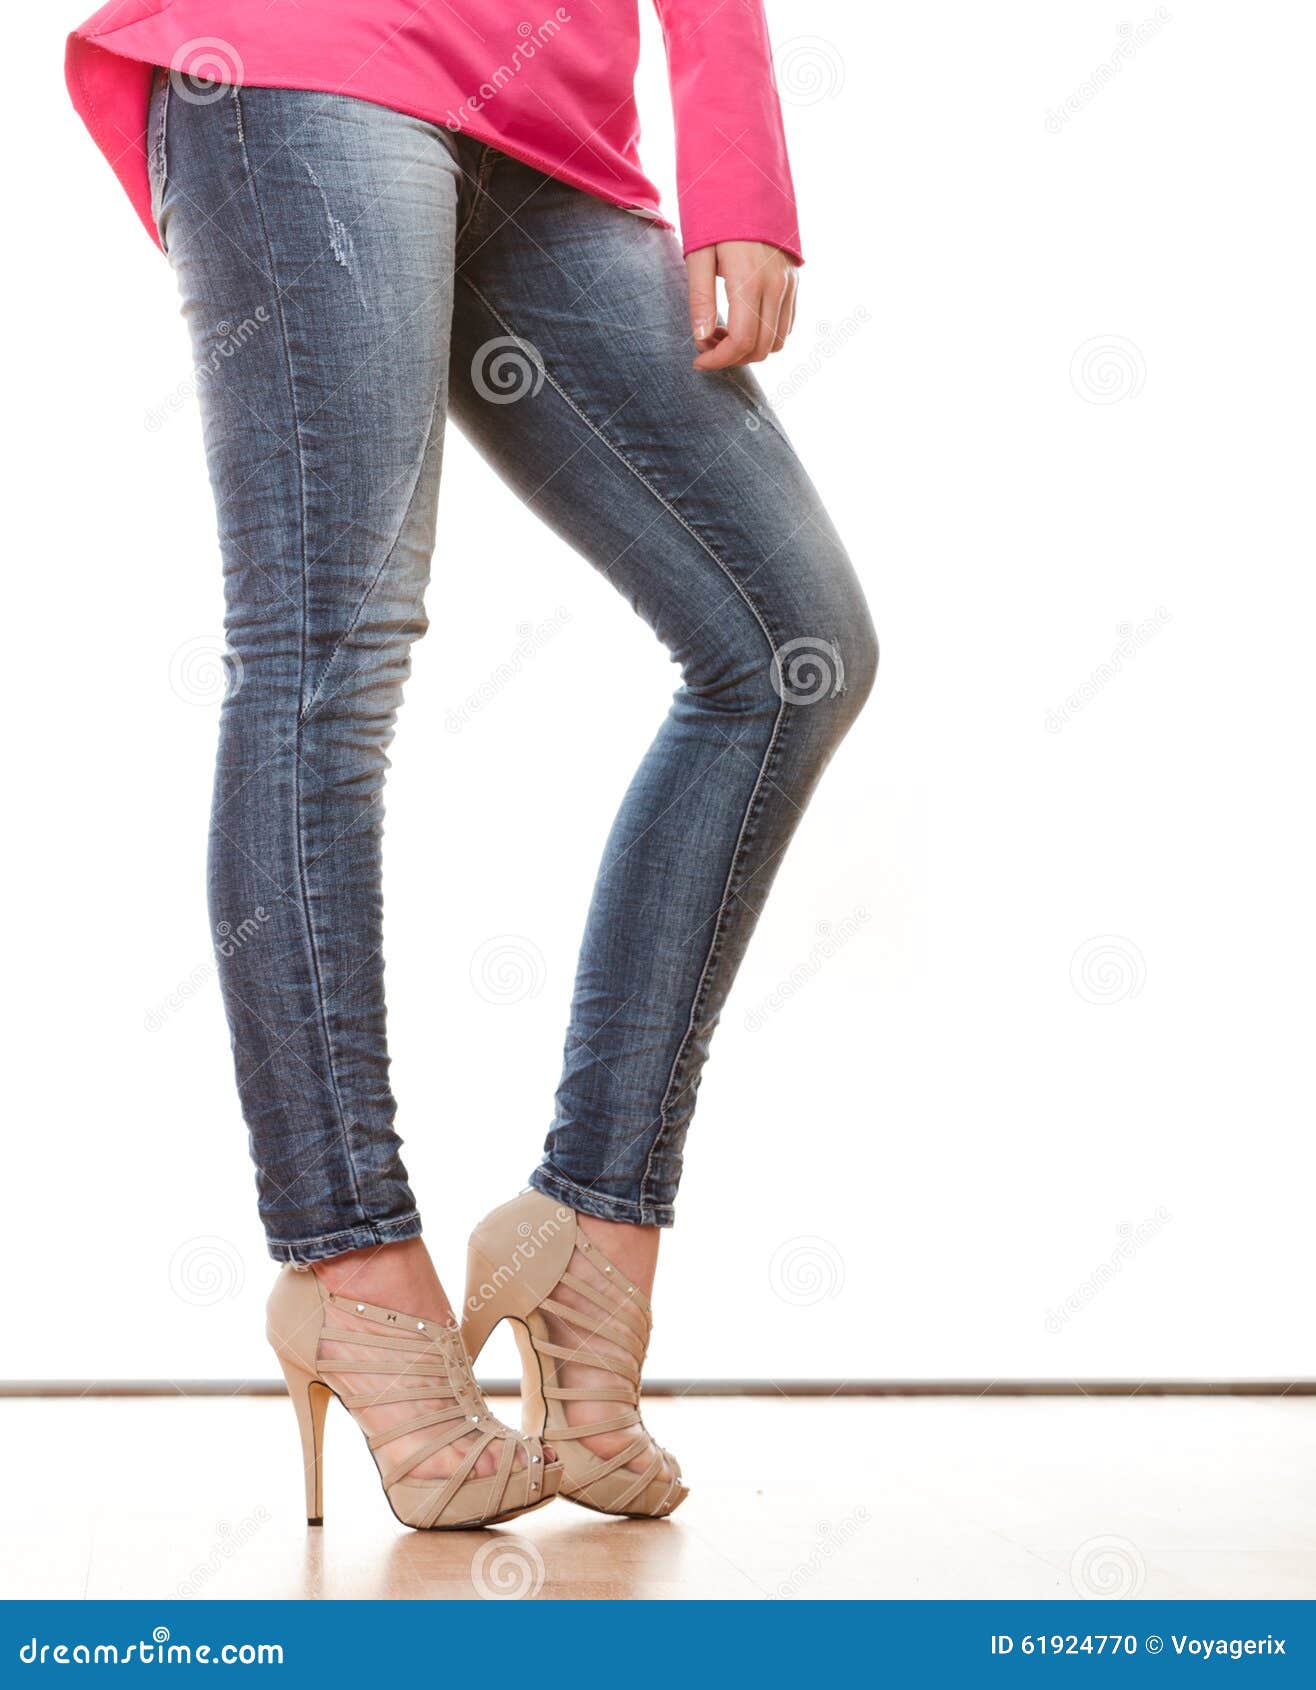 Woman Legs in Denim Trousers High Heels Shoes Stock Photo - Image of ...